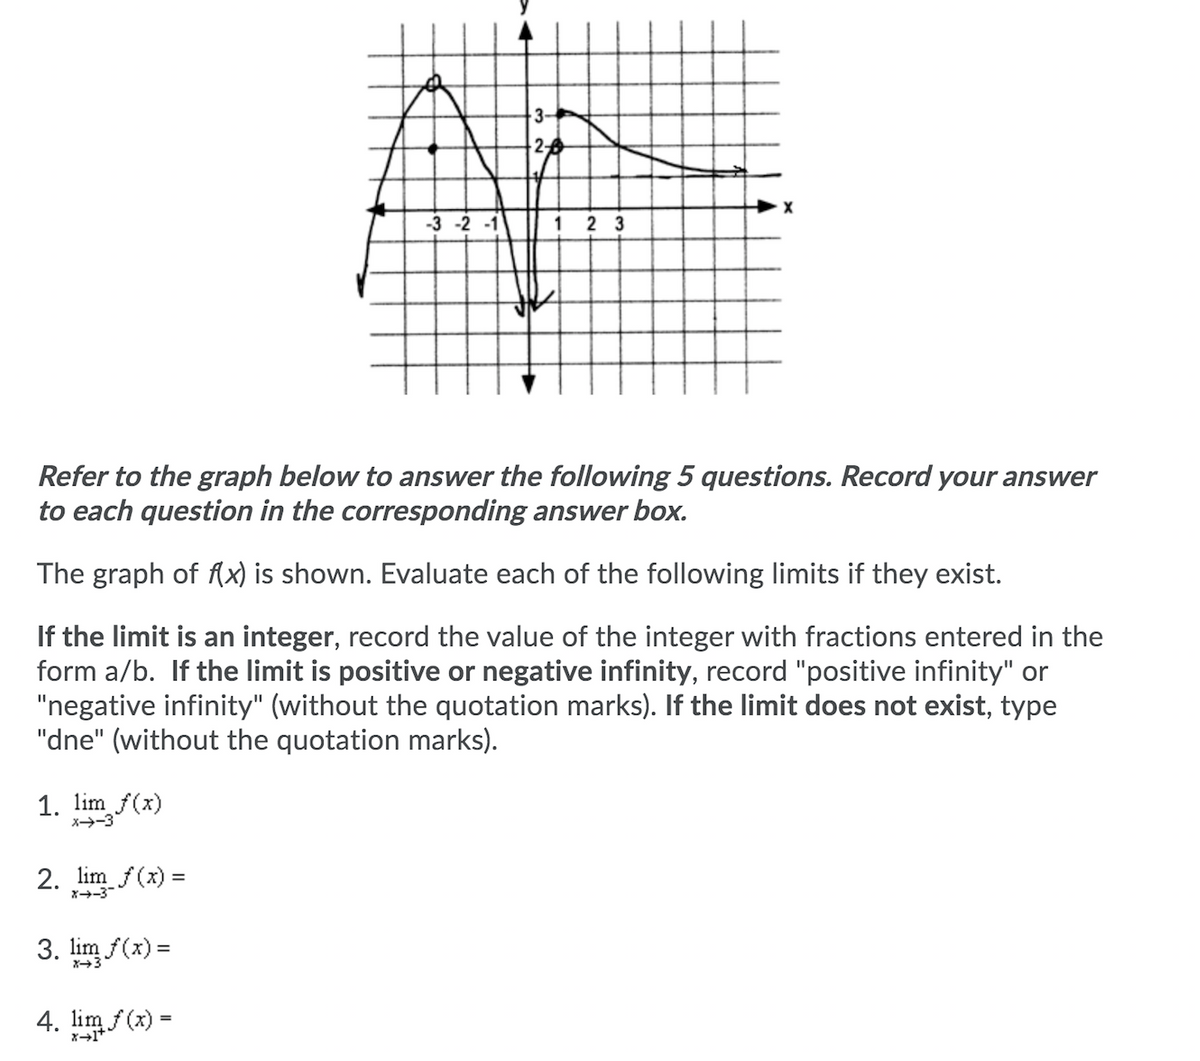 3-
-3 -2 -1
1 2 3
Refer to the graph below to answer the following 5 questions. Record your answer
to each question in the corresponding answer box.
The graph of Ax) is shown. Evaluate each of the following limits if they exist.
If the limit is an integer, record the value of the integer with fractions entered in the
form a/b. If the limit is positive or negative infinity, record "positive infinity" or
"negative infinity" (without the quotation marks). If the limit does not exist, type
"dne" (without the quotation marks).
1. lim f(x)
X-3
2. lim f(x) =
X-3
3. lim f(x) =
X3
4. lim f(x) =
